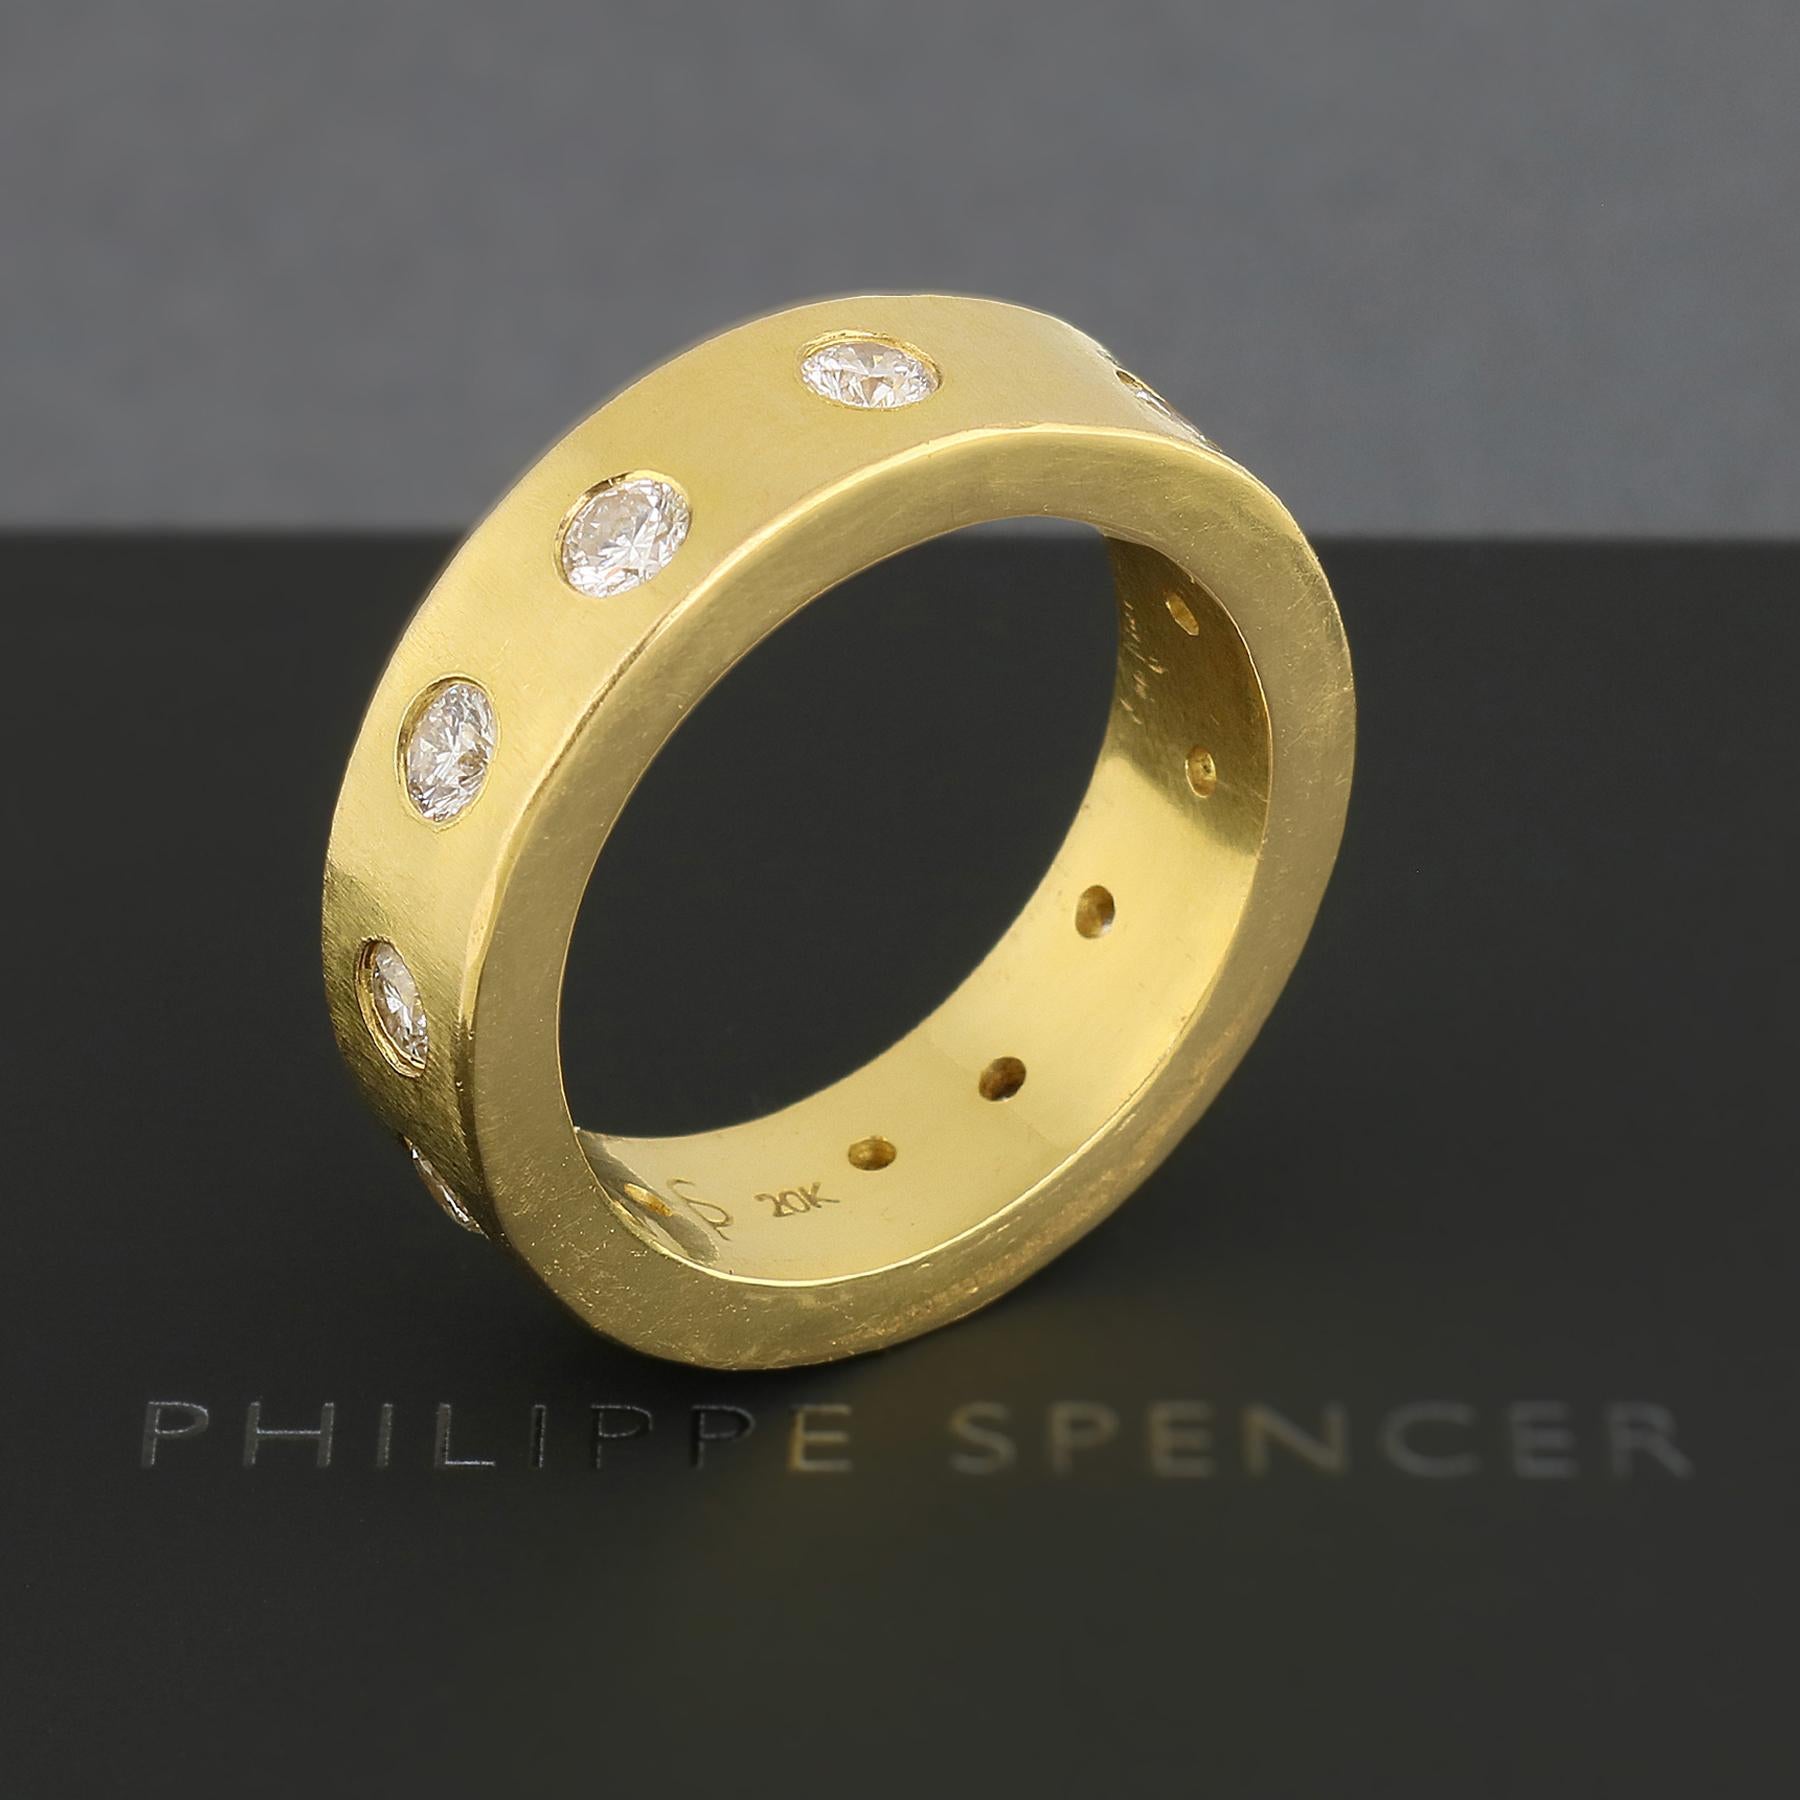 For Sale:  PHILIPPE SPENCER 20K Gold Hand-Forged Men's Ring and 2.16 Ct. Colorless Diamonds 2